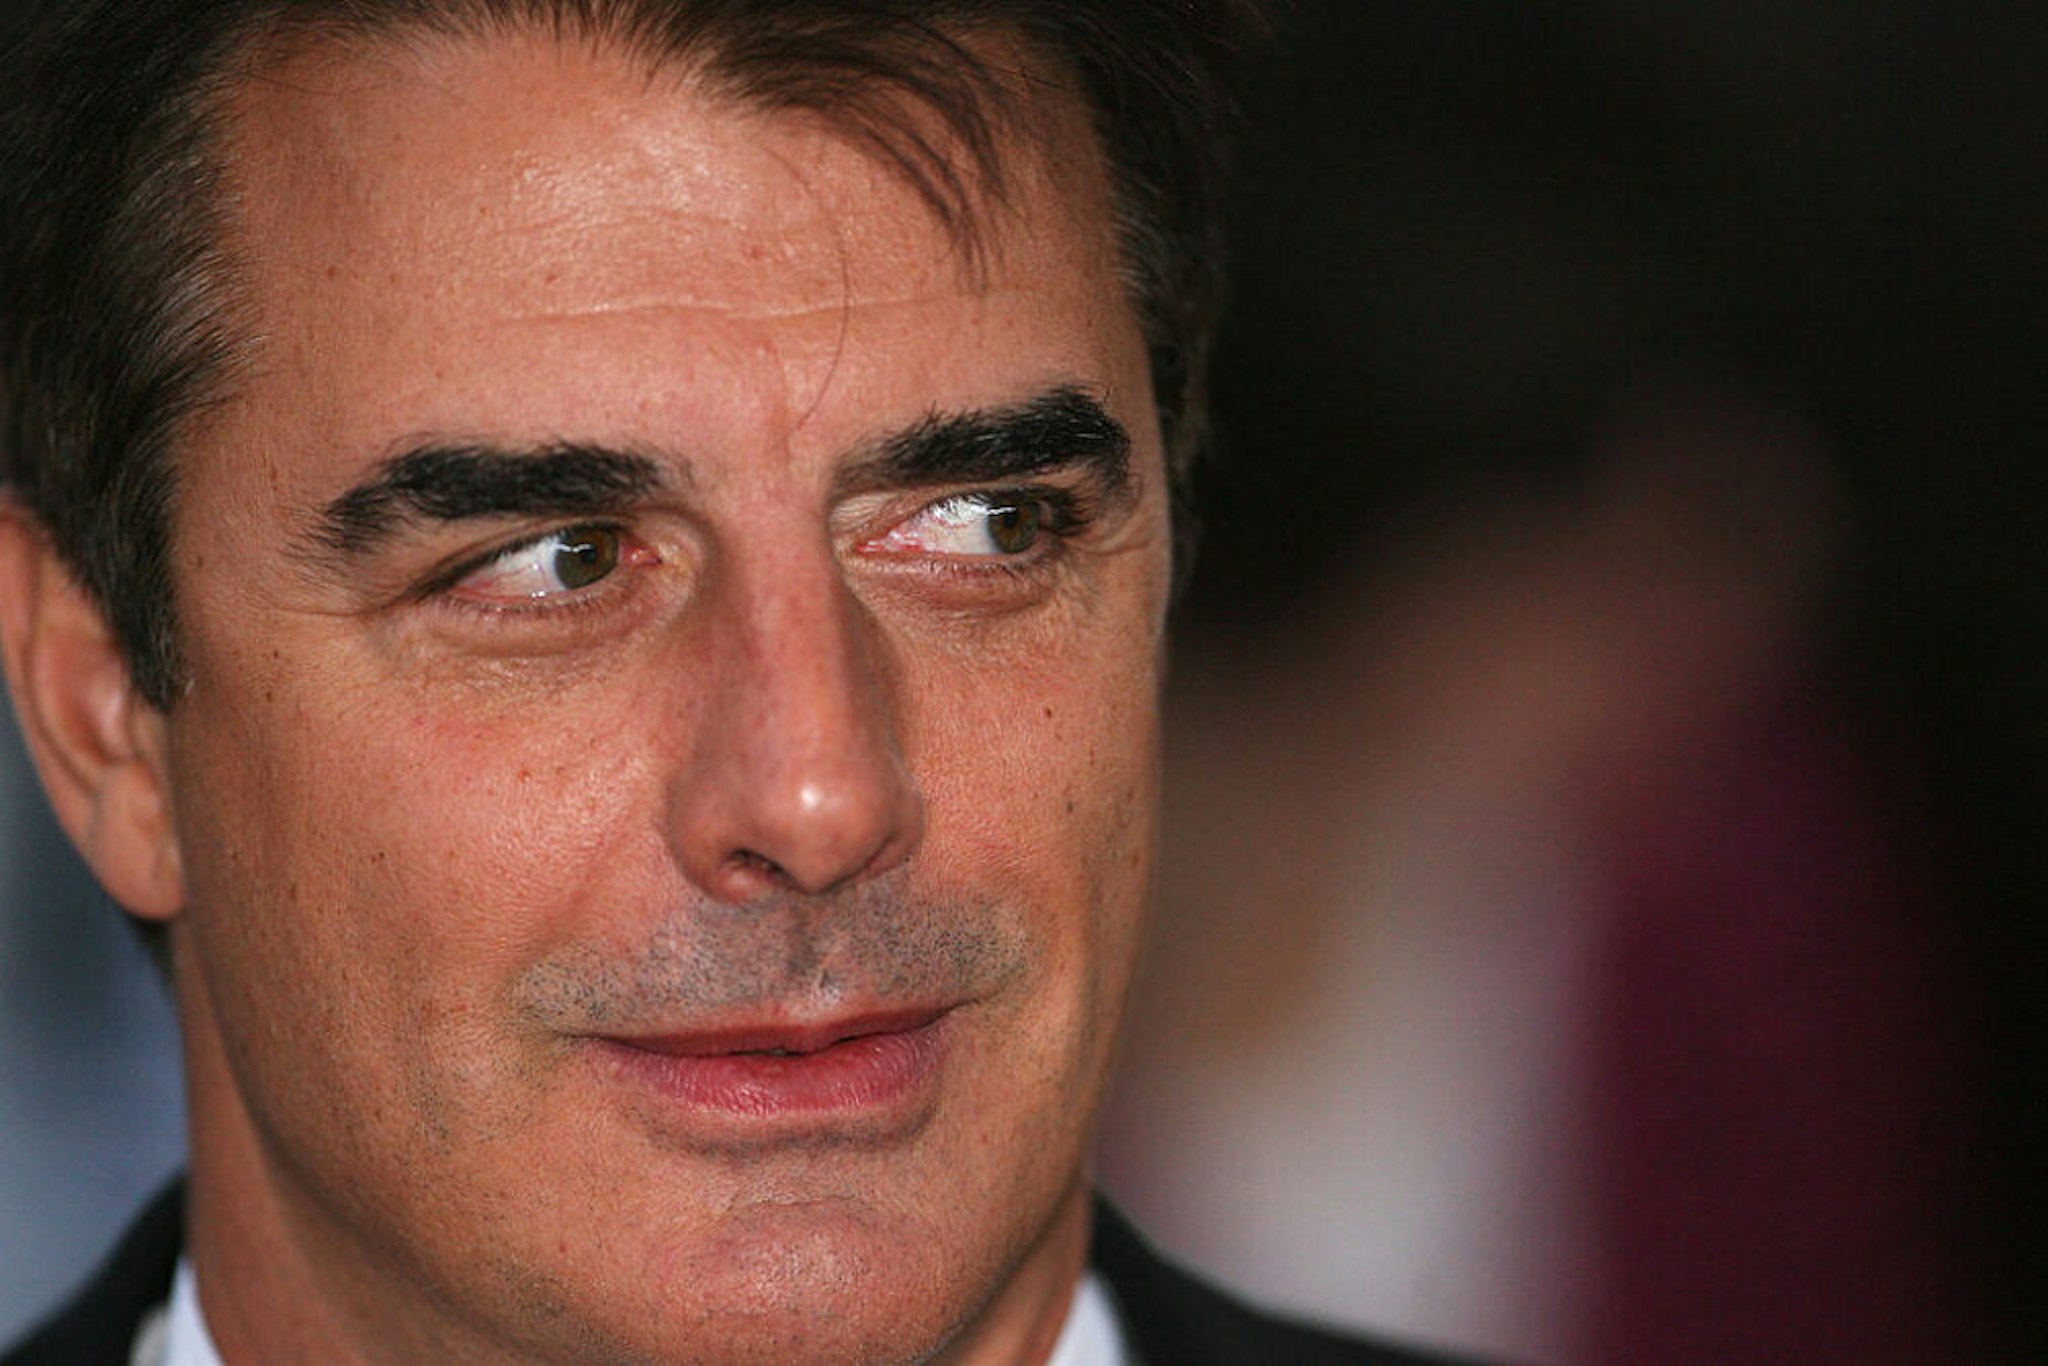 LONDON - SEPTEMBER 08: Actor Chris Noth arrives at the National Movie Awards at the Royal Festival Hall on September 8, 2008 in London, England.